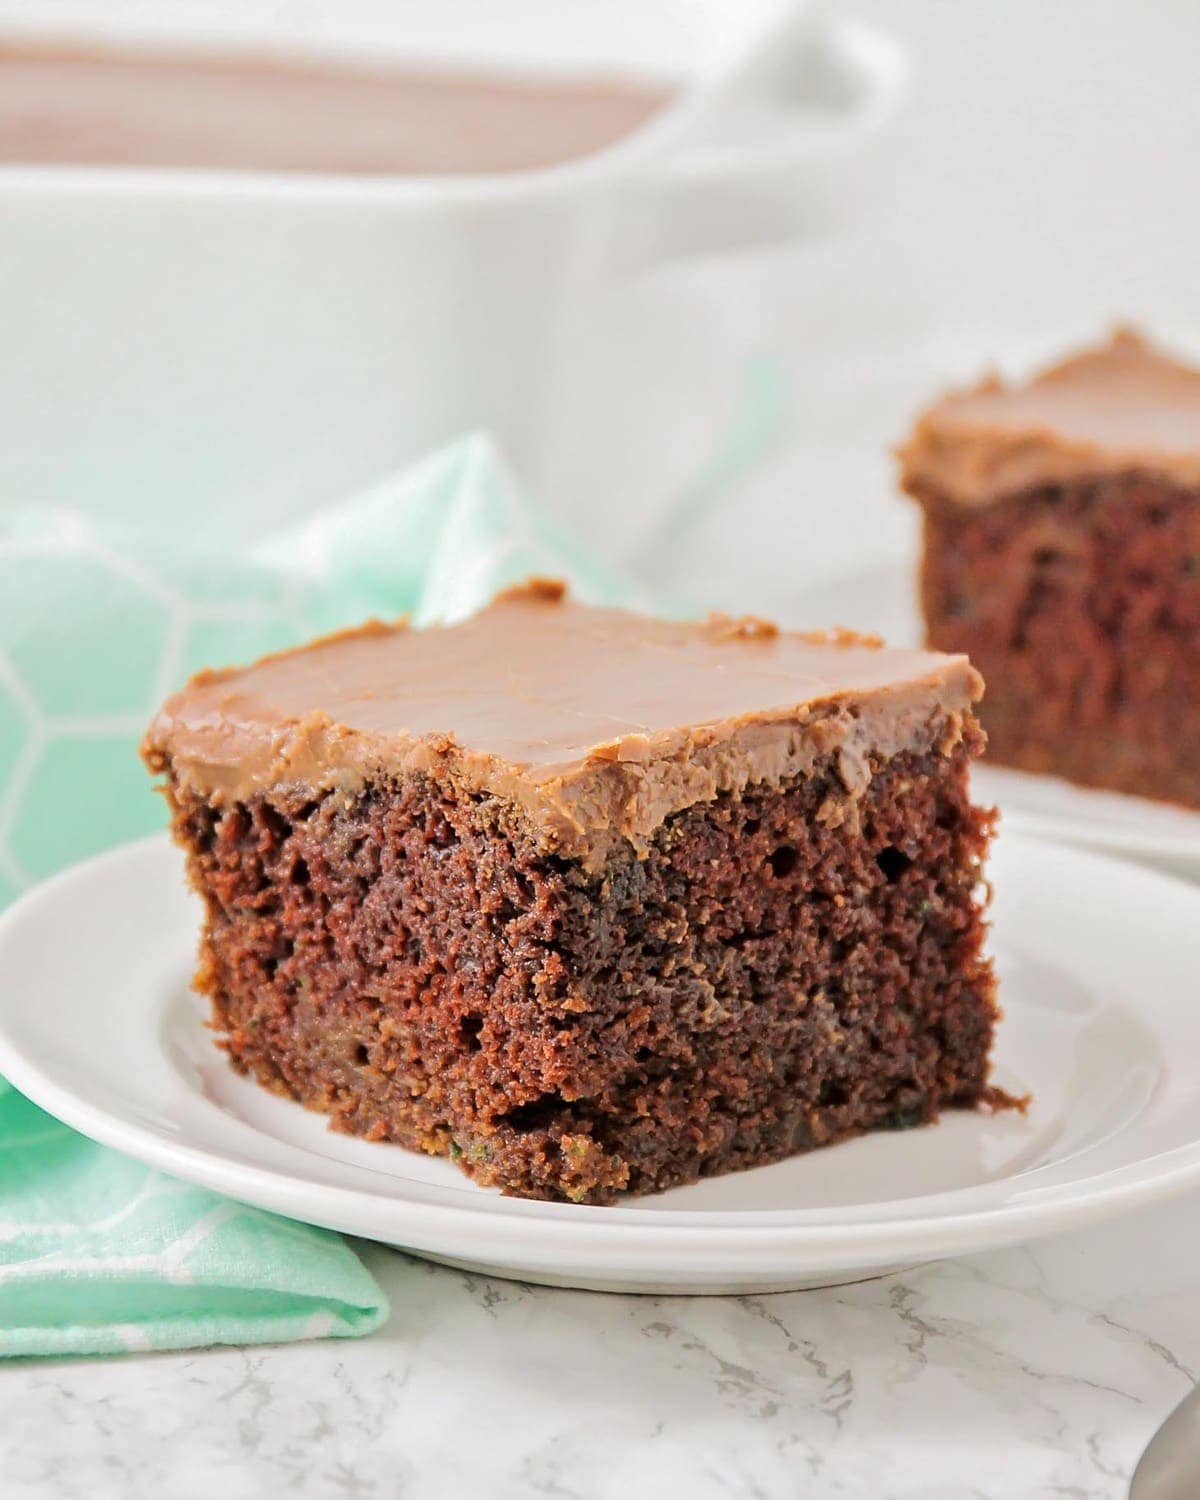 A close up of a slice of chocolate zucchini cake topped with chocolate frosting.